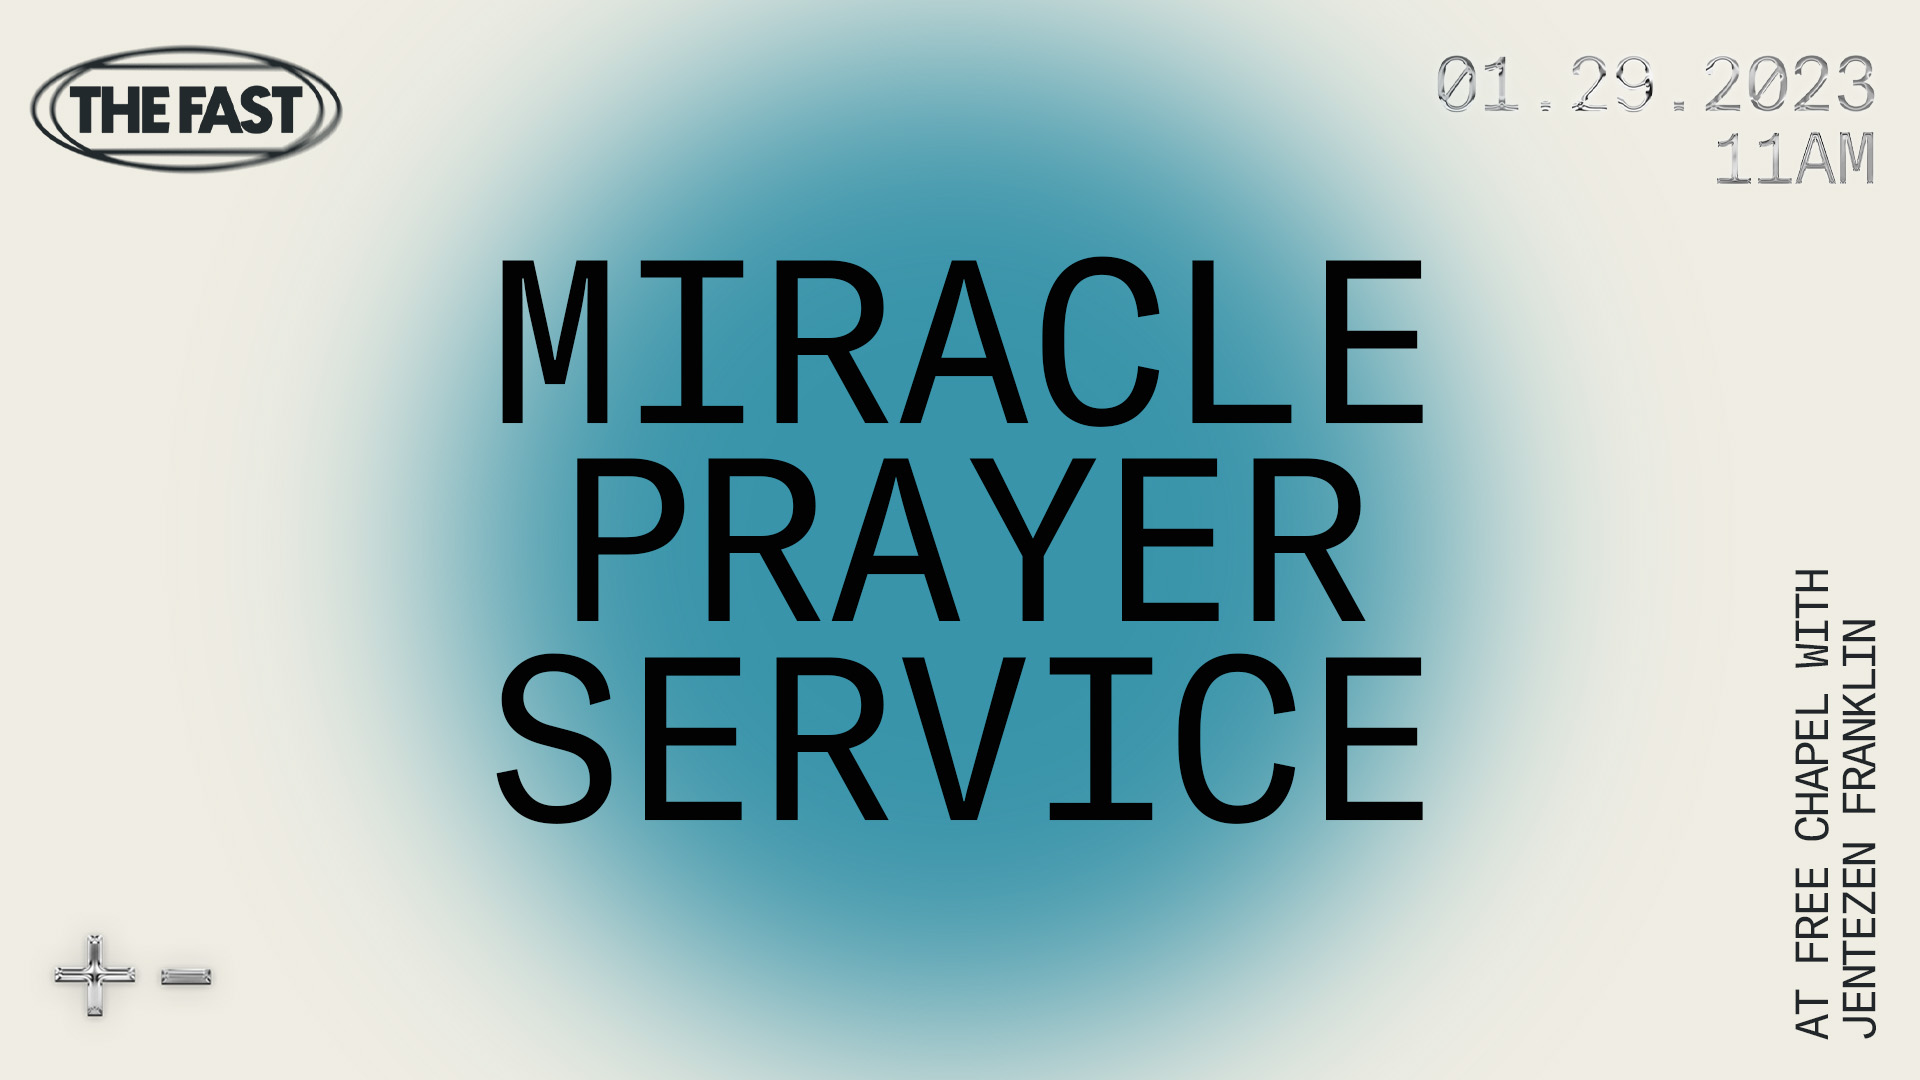 Miracle Prayer Service at the Spartanburg campus